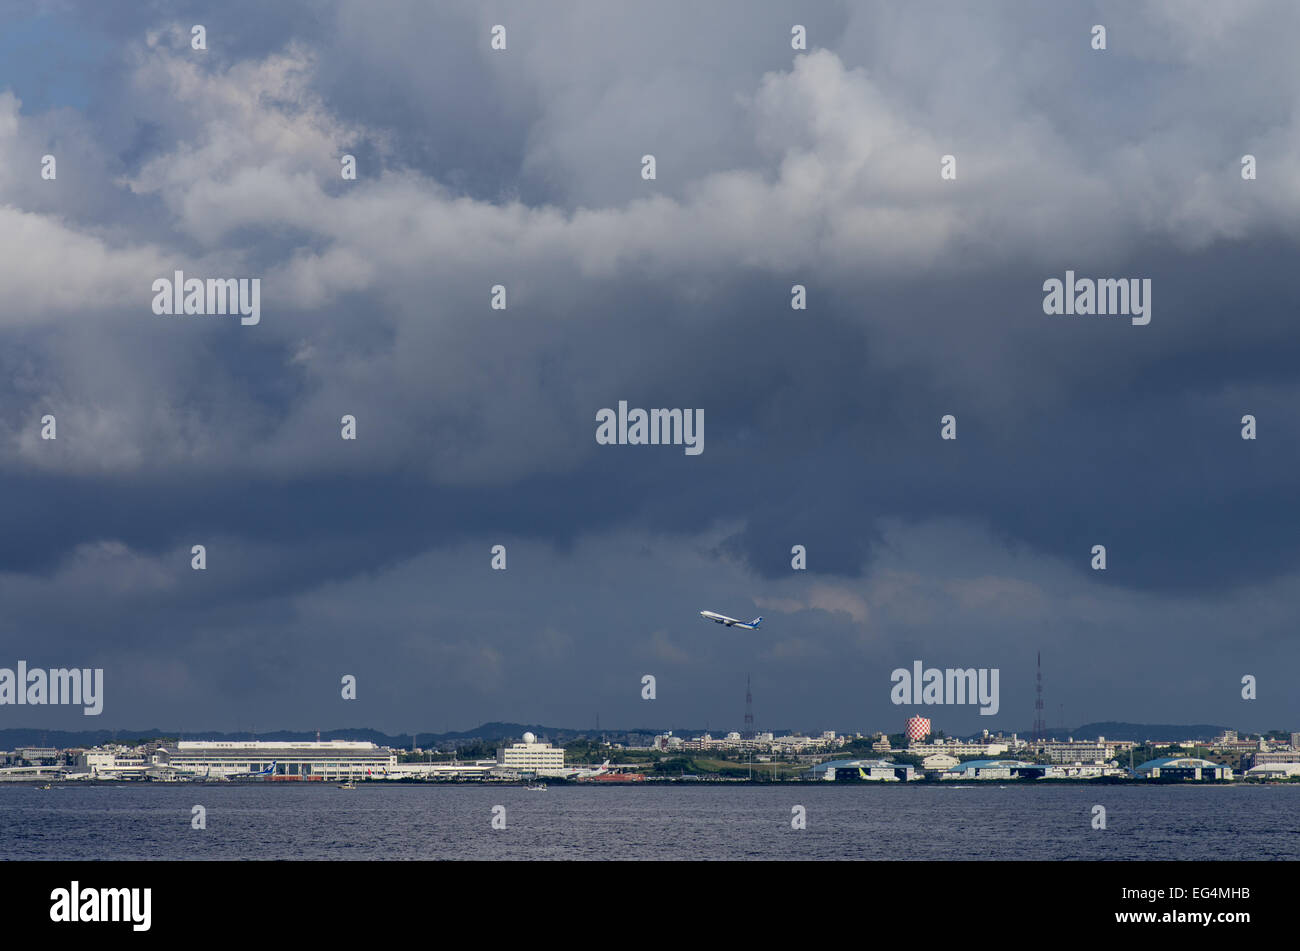 Naha Airport as seen from sea with a departing ANA plane during approaching typhoon, Naha, Okinawa, Japan Stock Photo